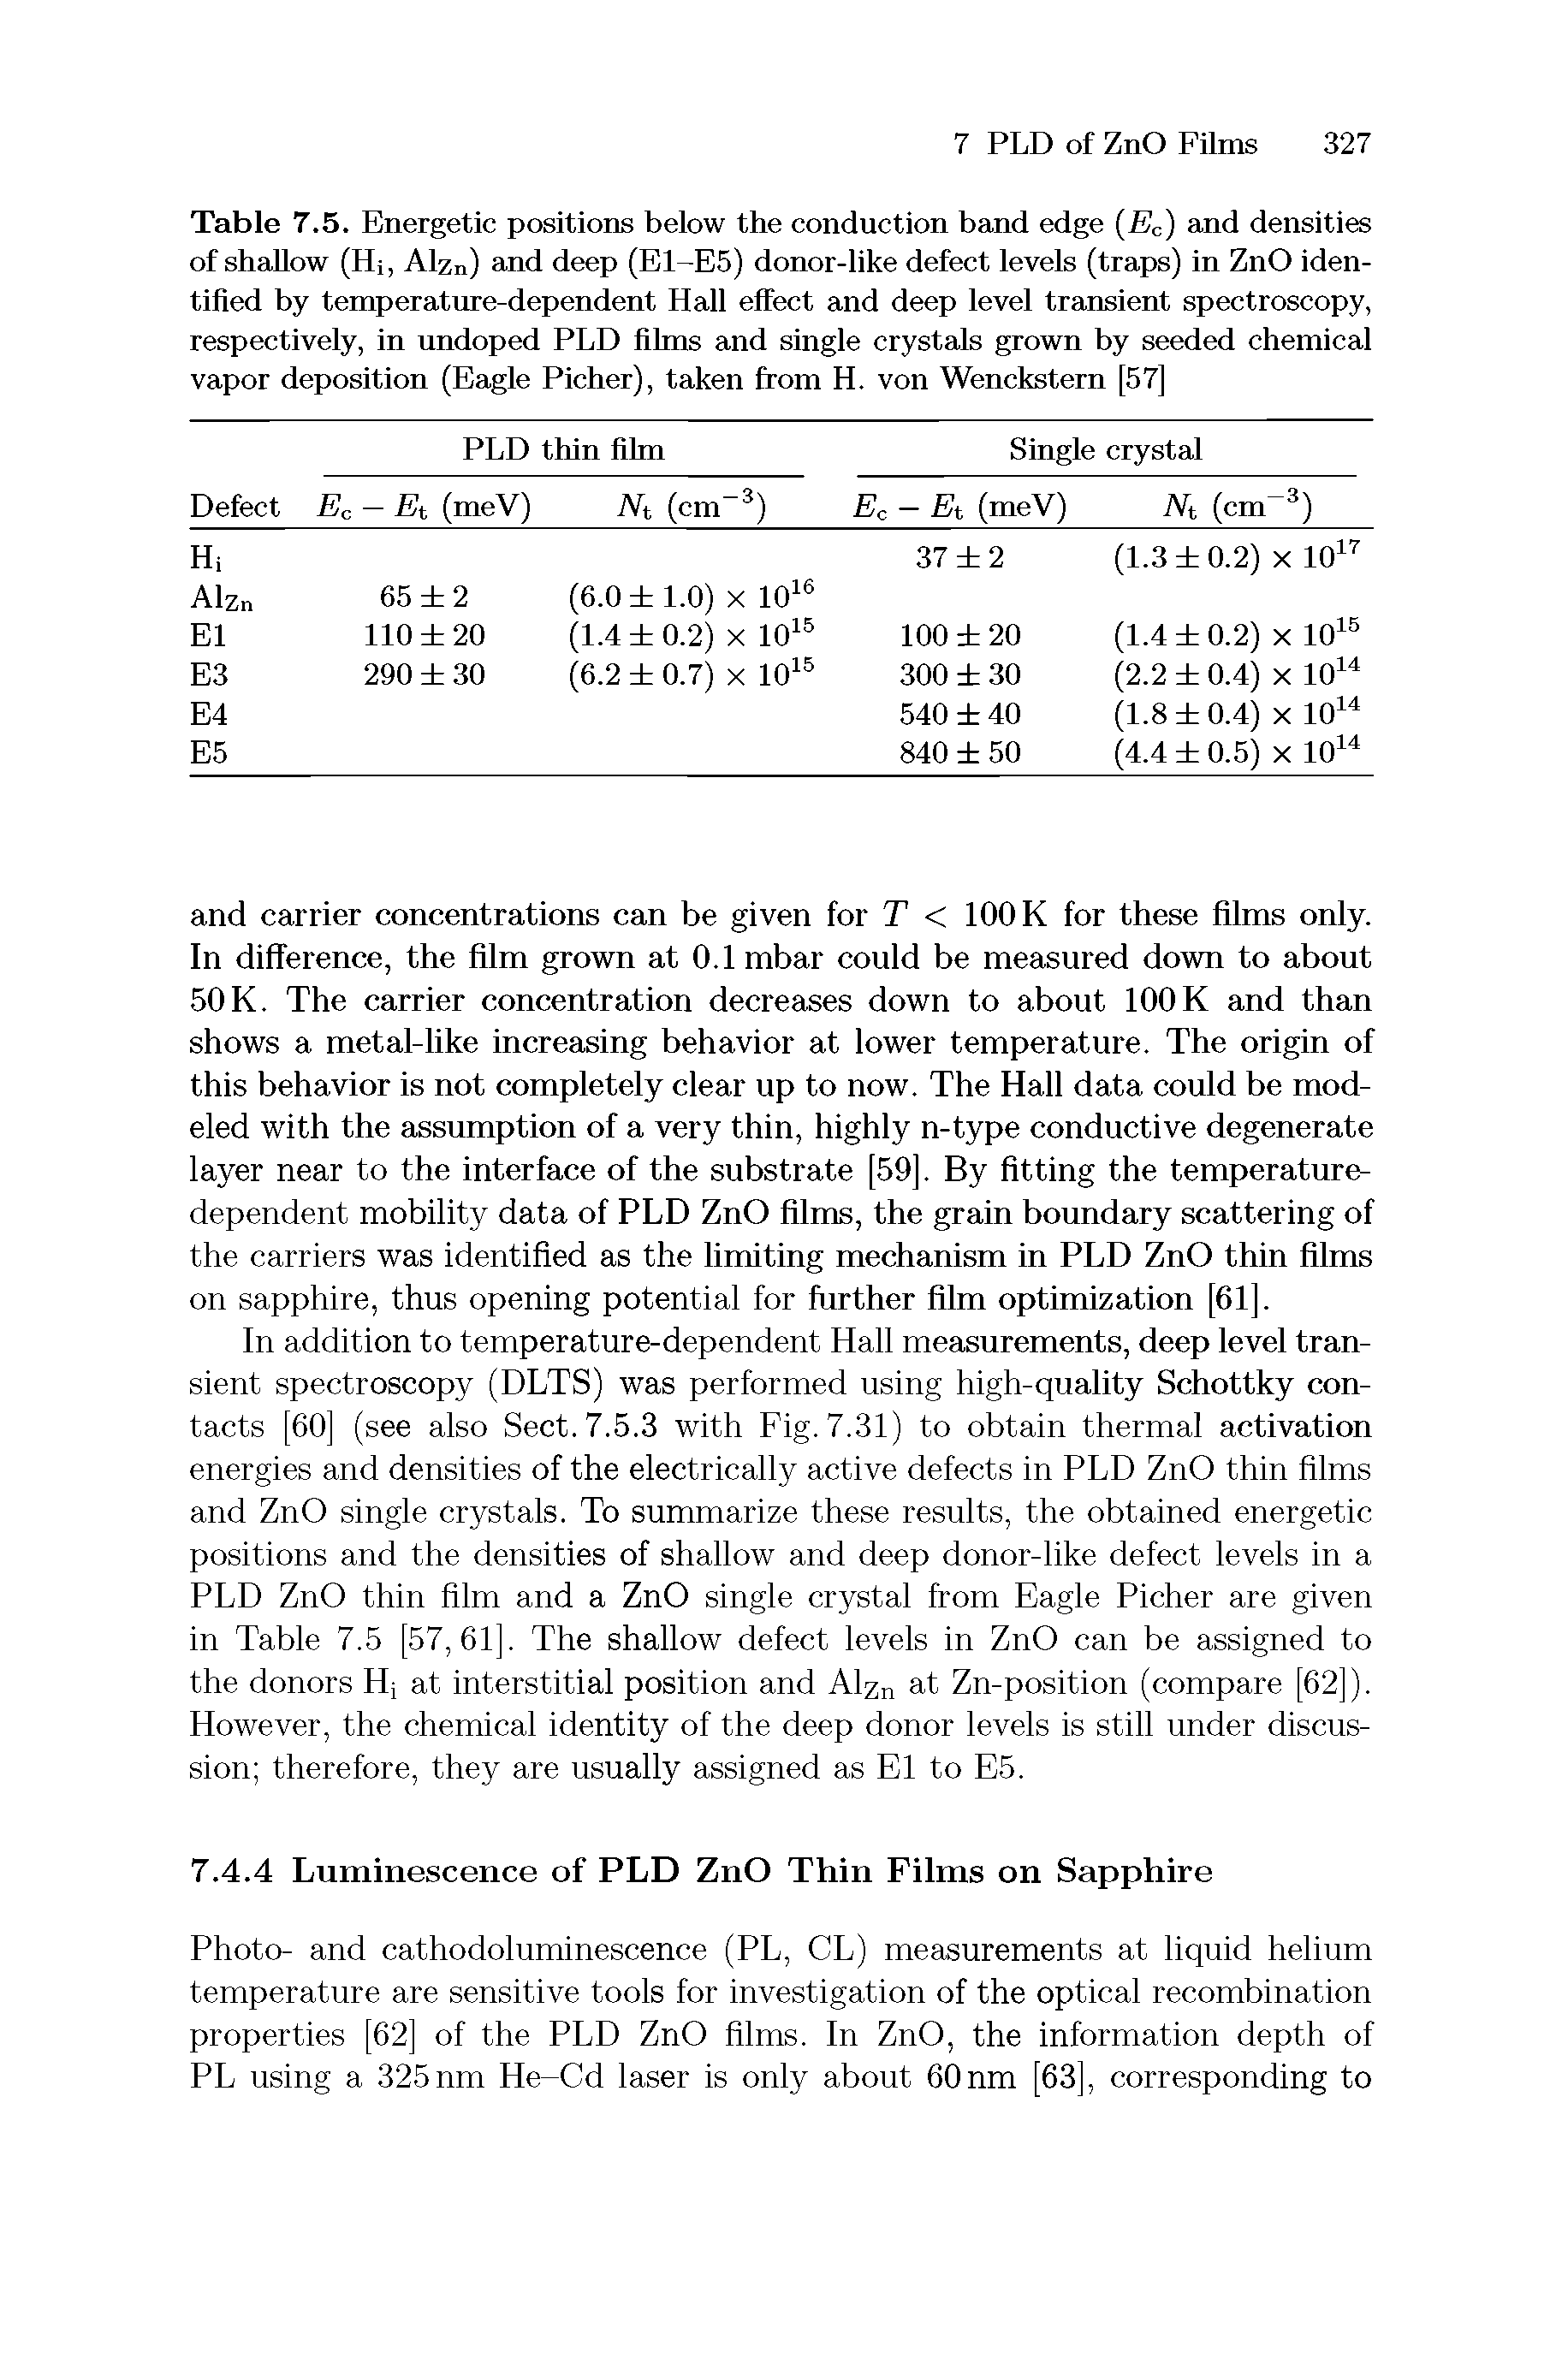 Table 7.5. Energetic positions below the conduction band edge (Ec) and densities of shallow (Hi, Alzn) and deep (I ll -E5) donor-like defect levels (traps) in ZnO identified by temperature-dependent Hall effect and deep level transient spectroscopy, respectively, in undoped PLD films and single crystals grown by seeded chemical vapor deposition (Eagle Picher), taken from H. von Wenckstern [57]...